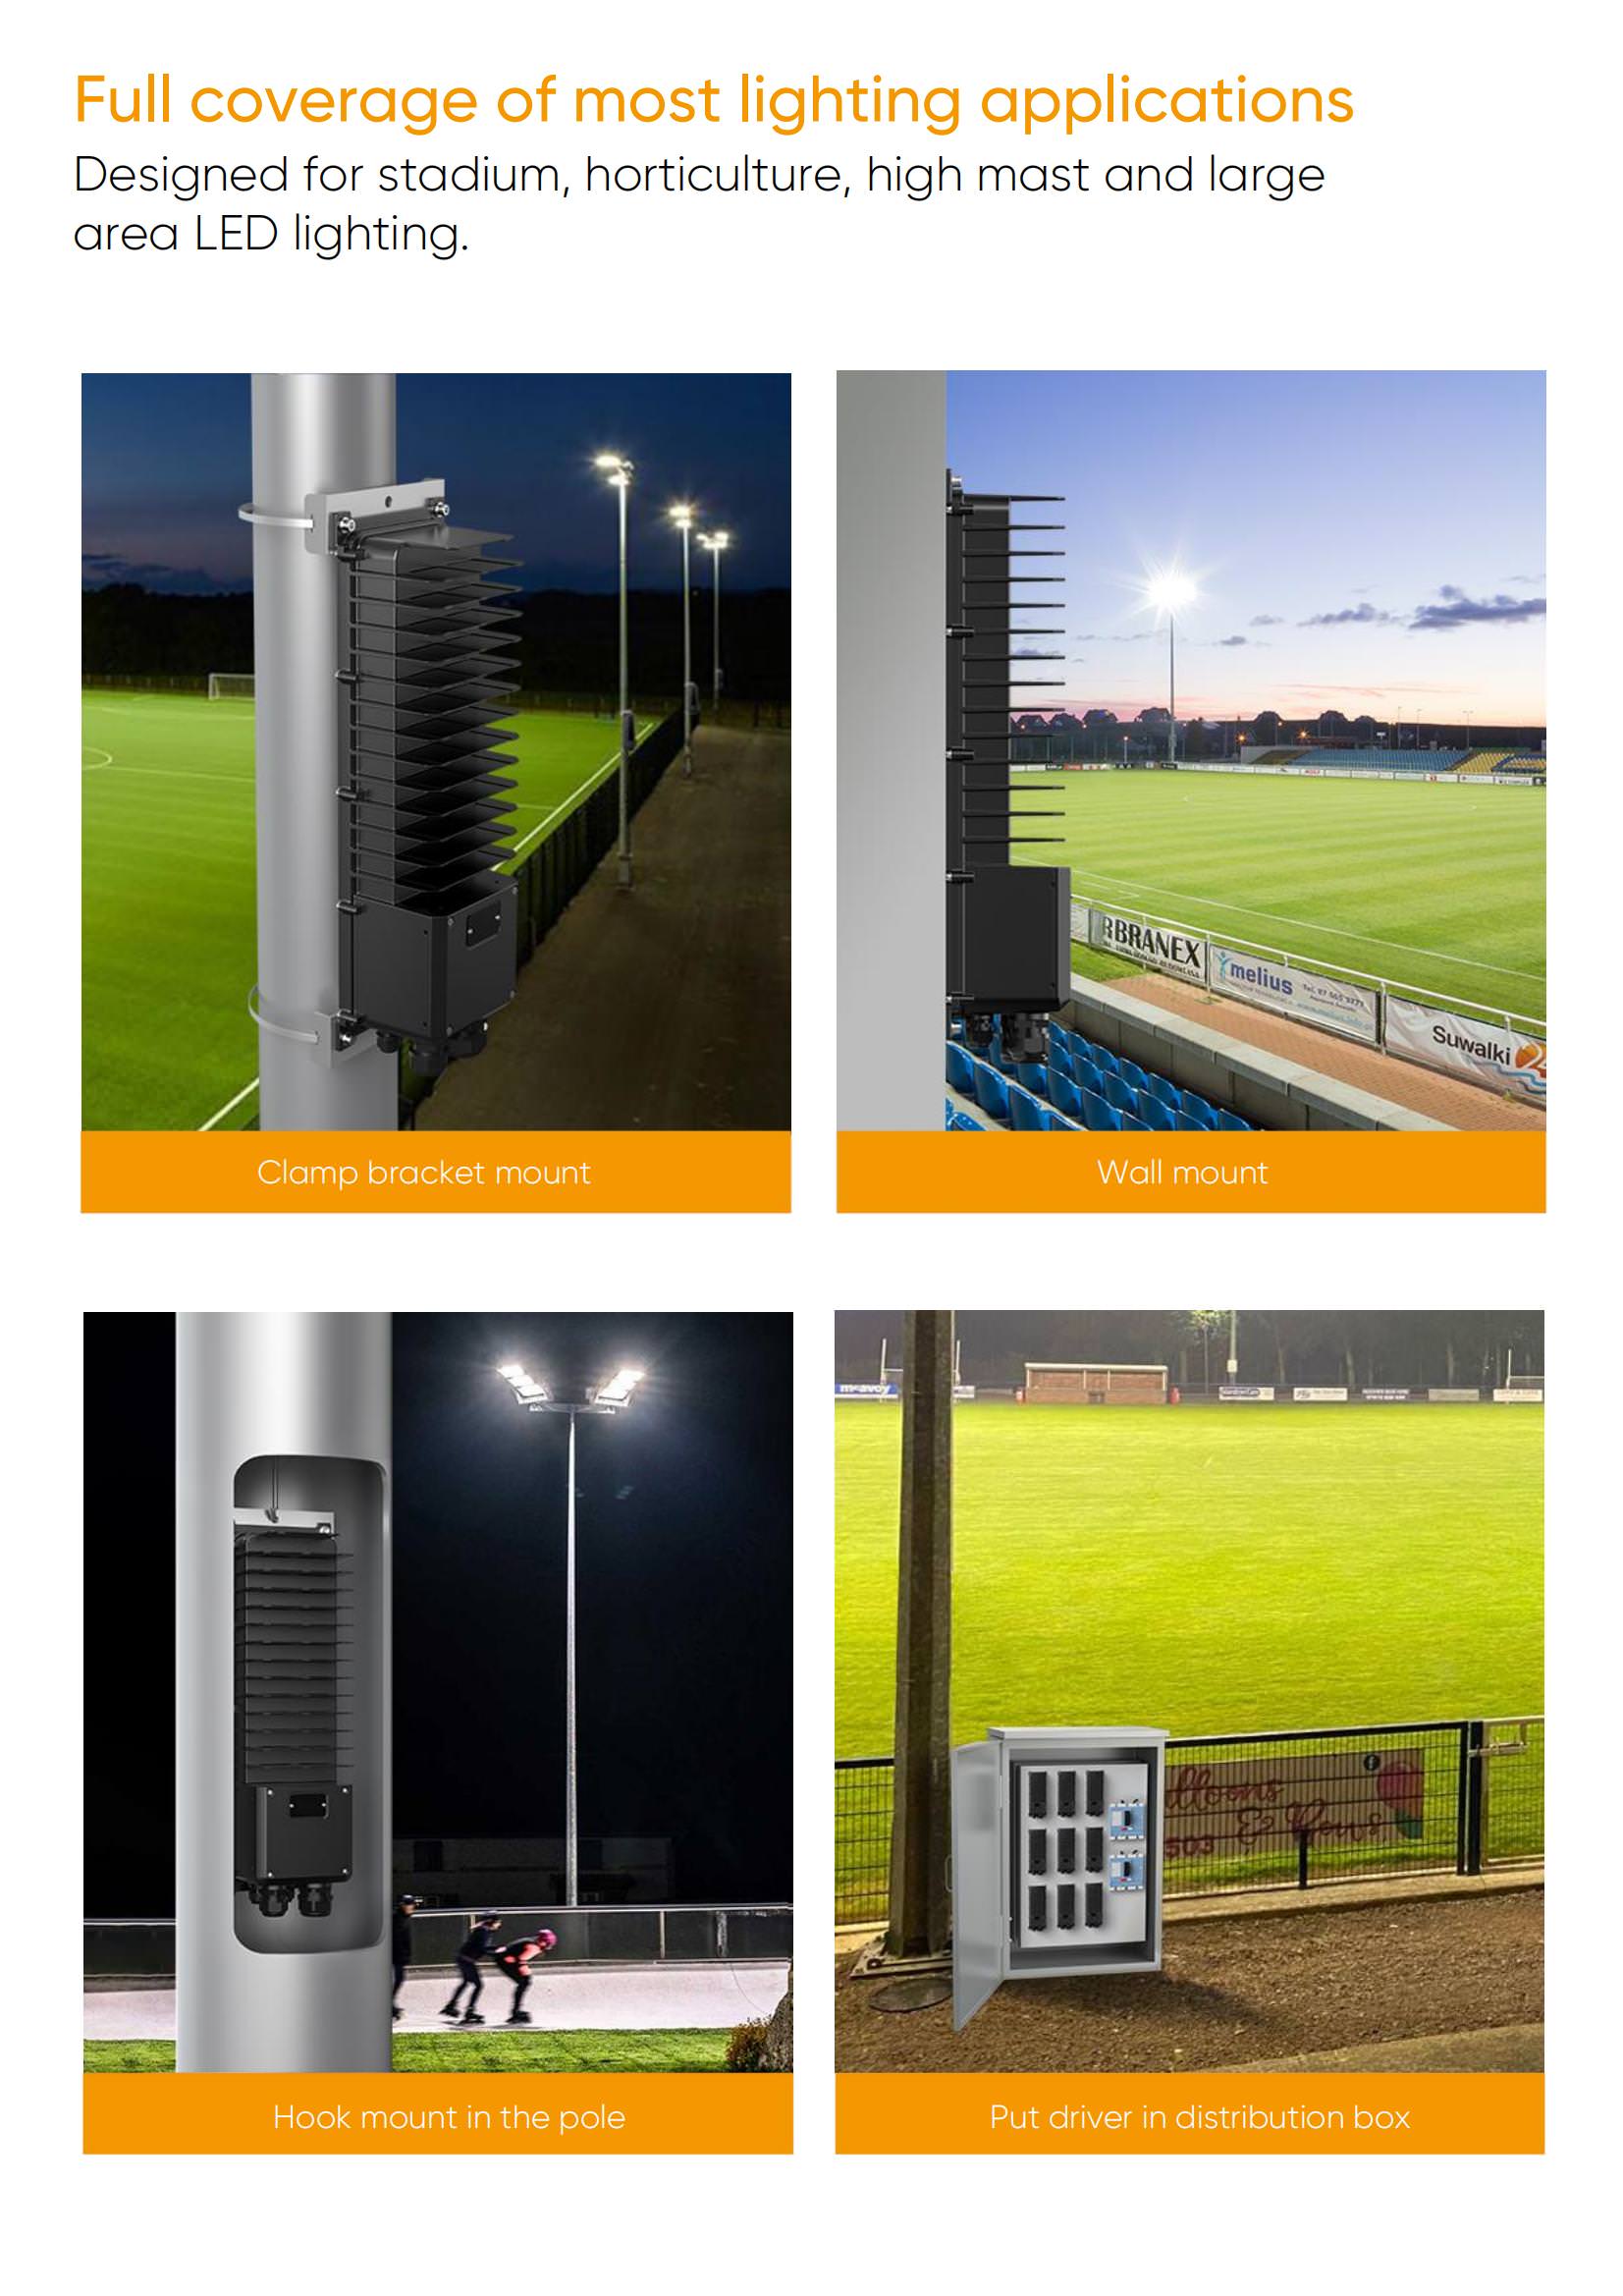 1800w driver for stadium, horticulture, high mast and large area LED lighting_05